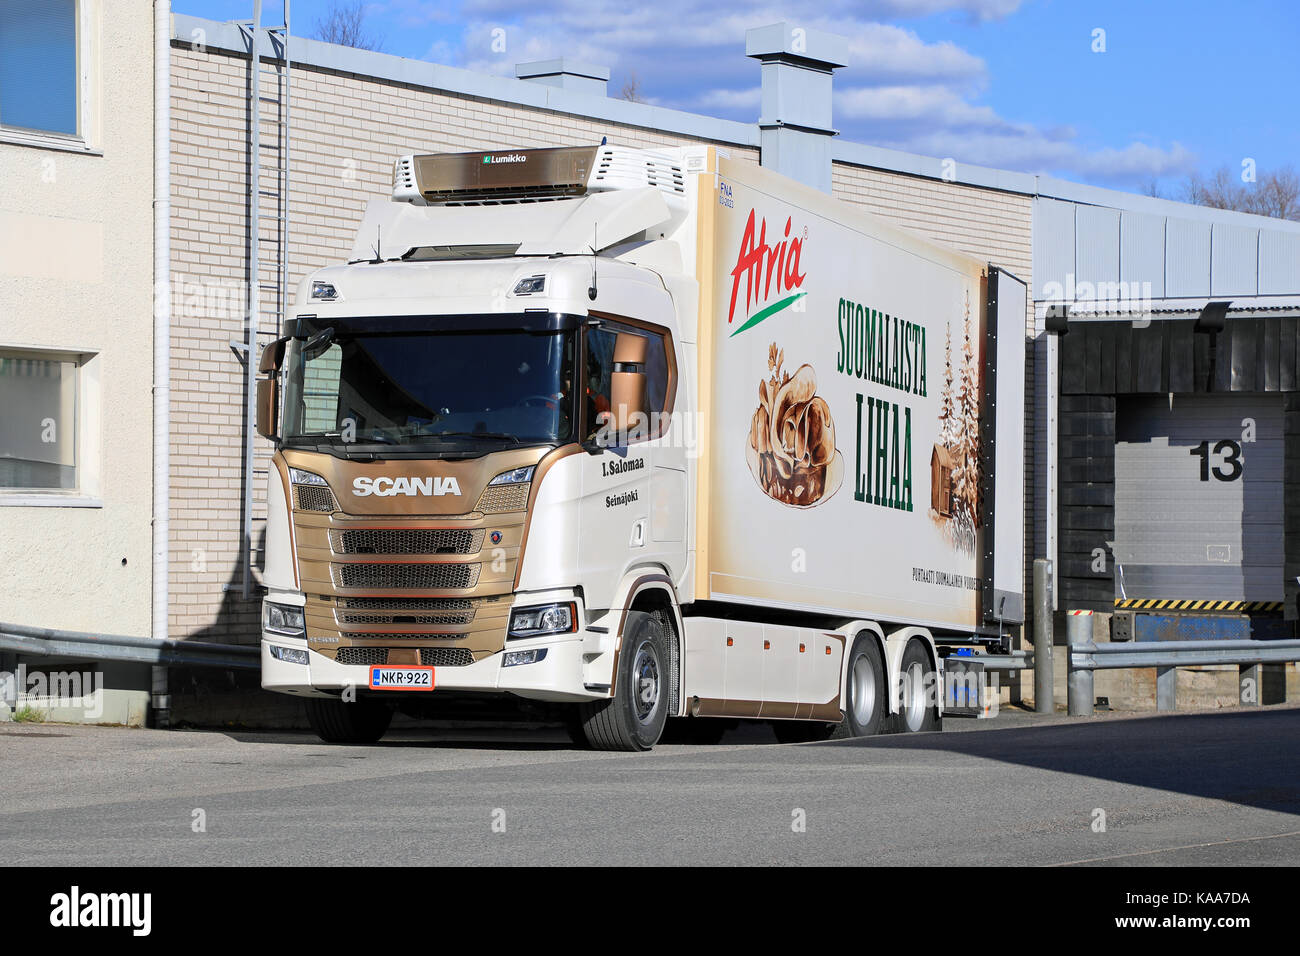 Lorry Loading High Resolution Stock Photography and Images - Alamy